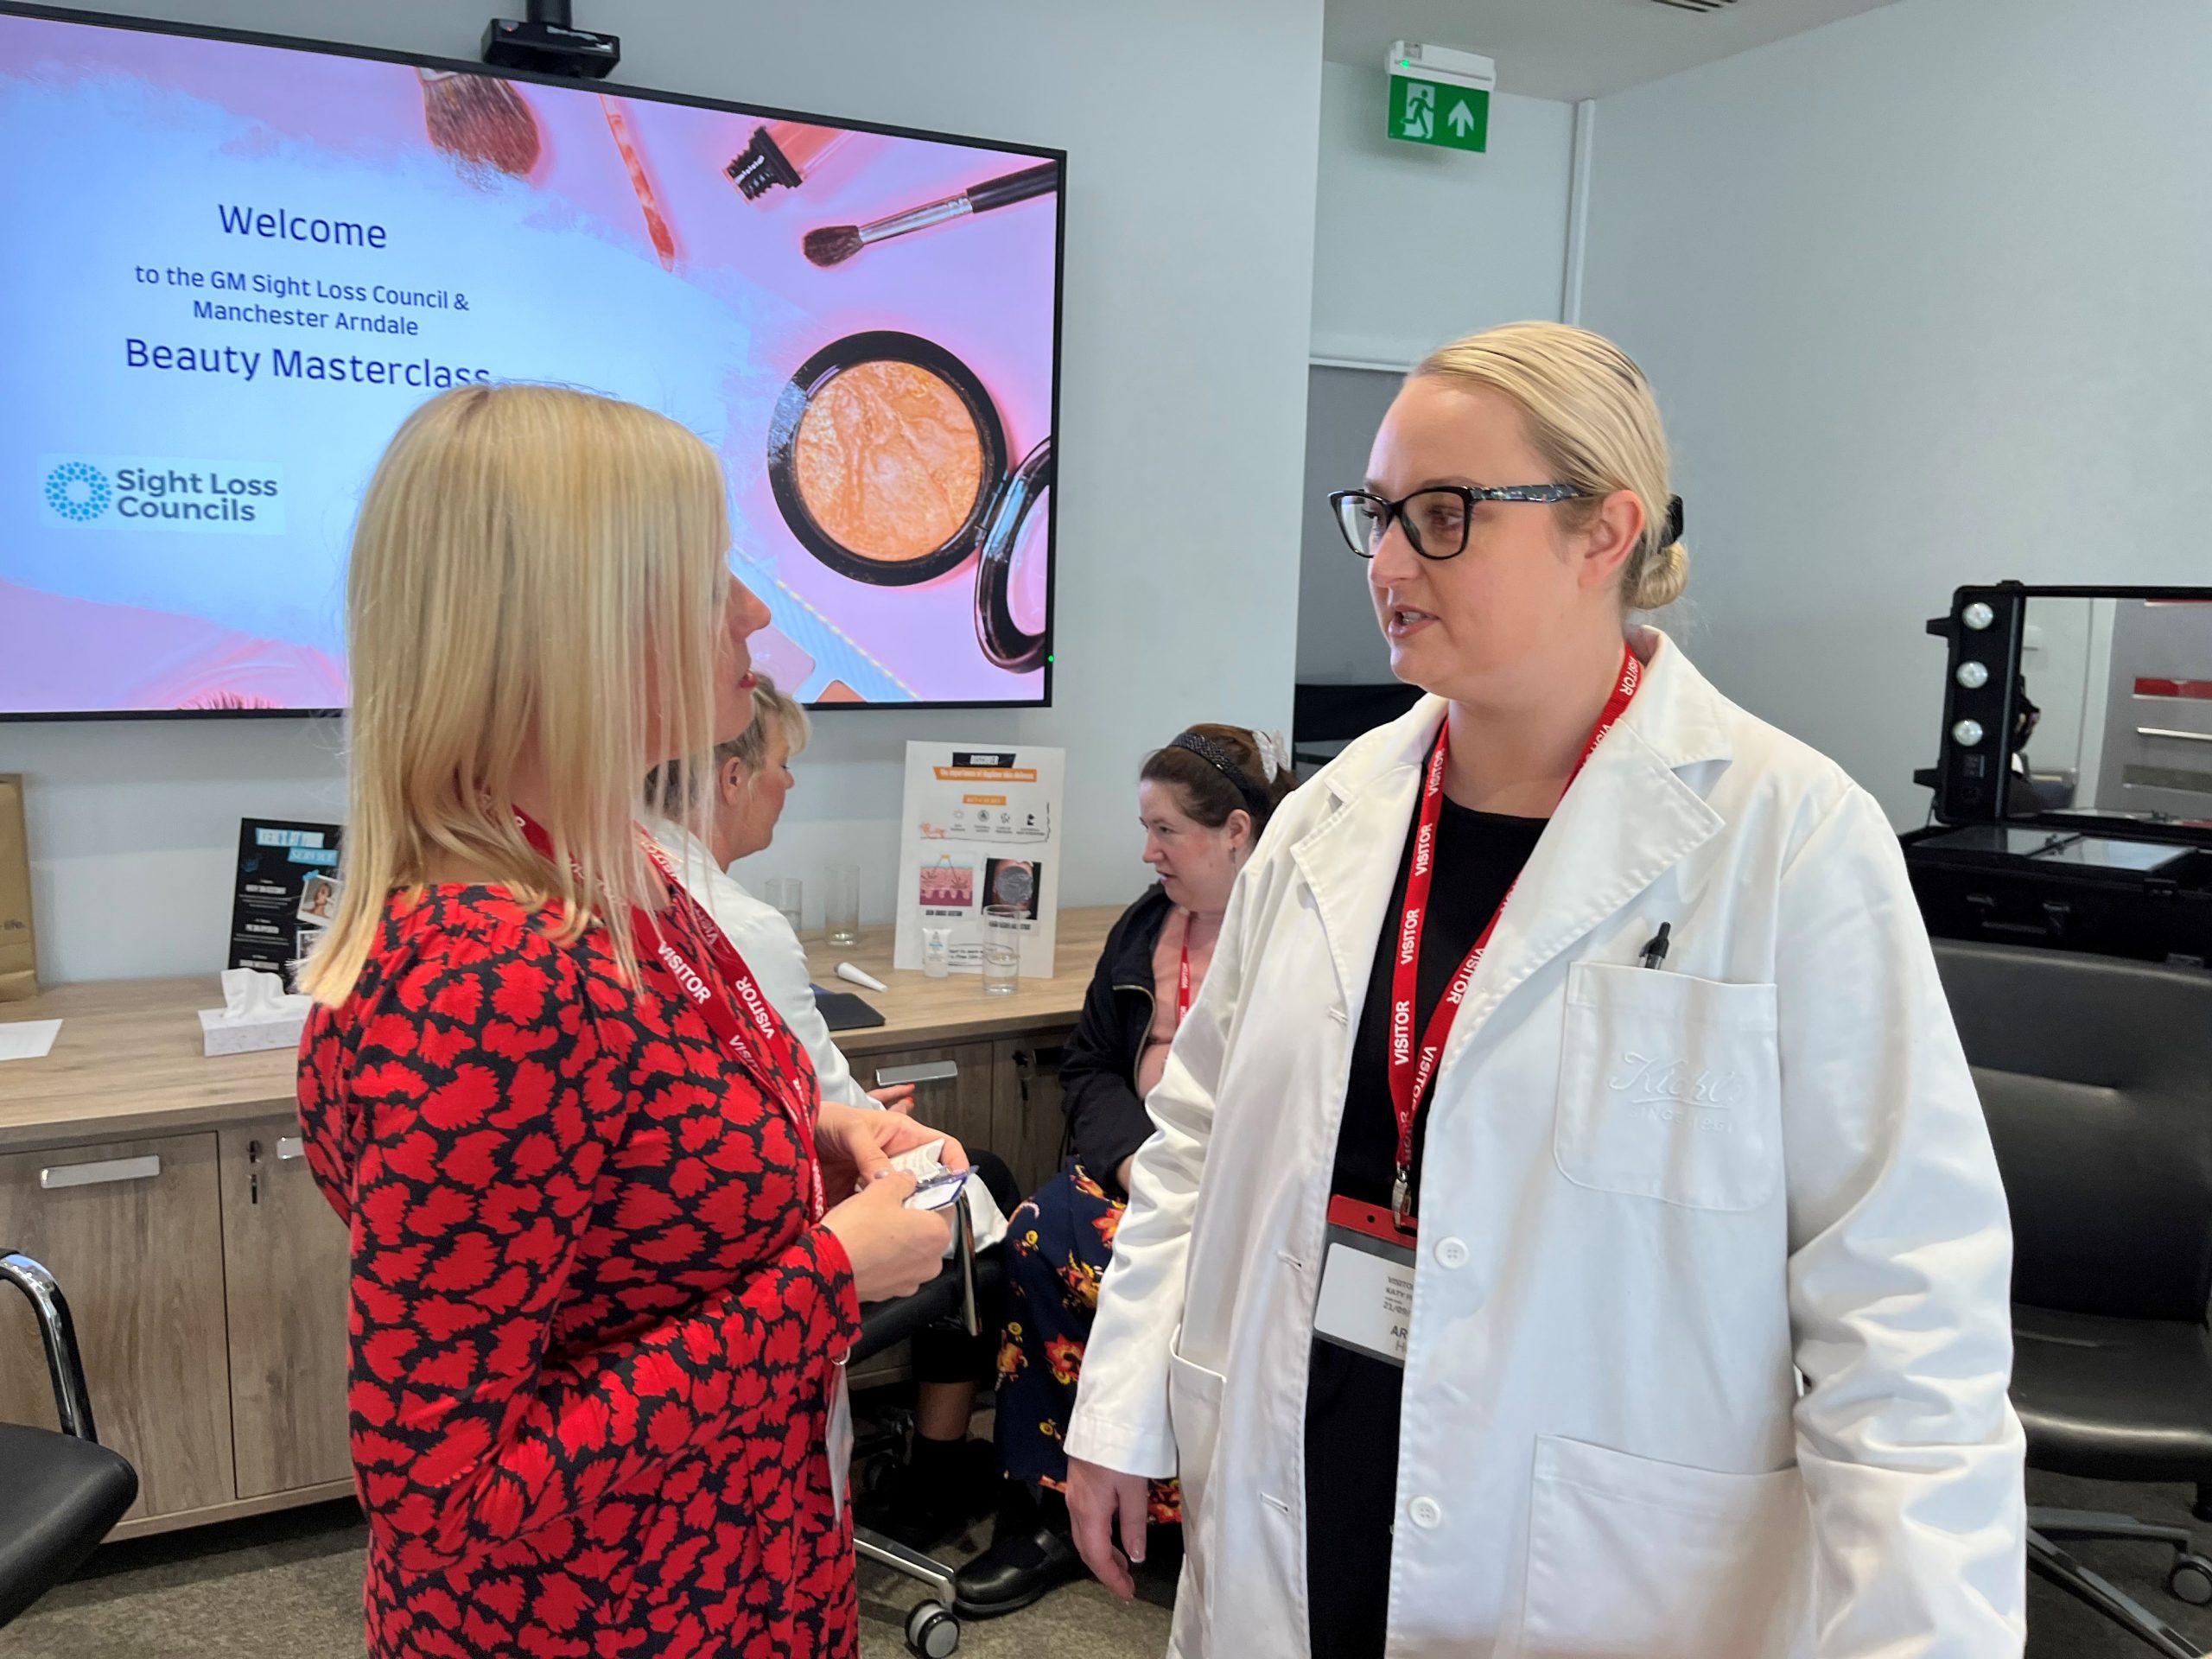 Kelly Barton, Engagement Manager for the North West, photographed talking to a Lancome representative. An attendees is shown sitting in the background during her one to one with a skincare specialist.